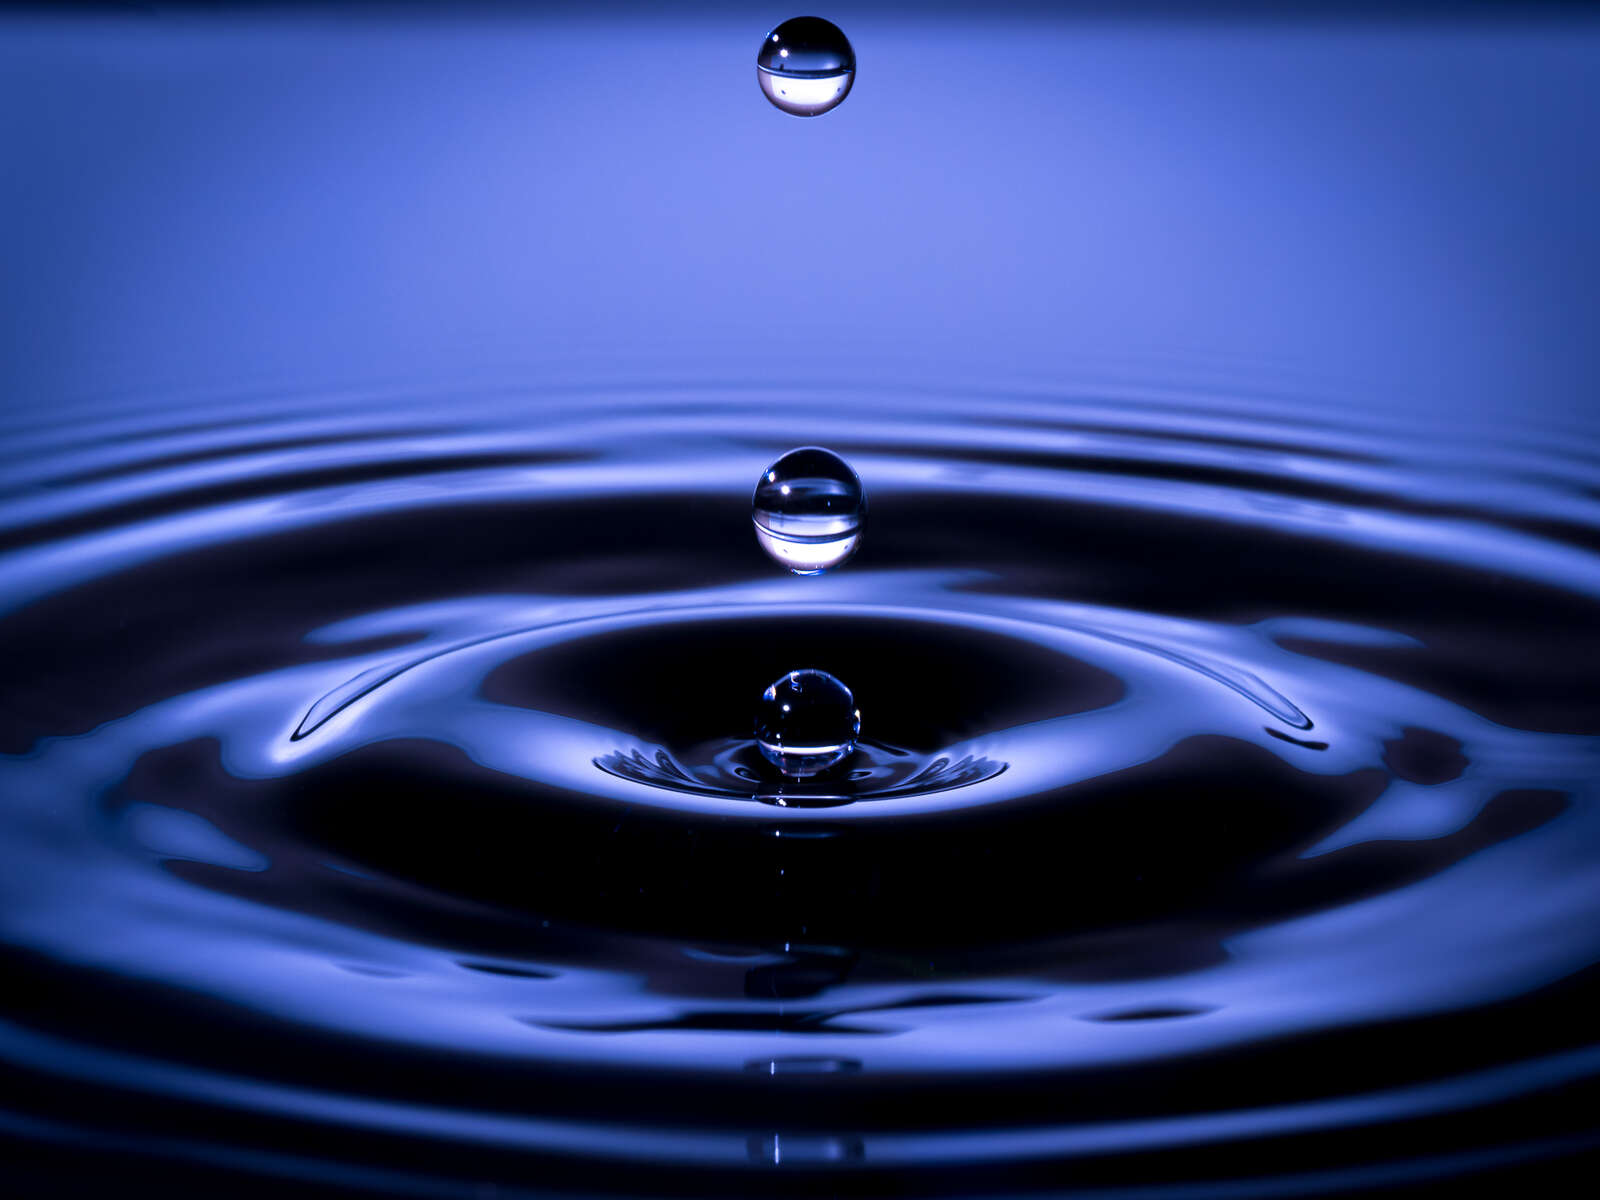 Capturing Water Droplets: A Quick How-To On Getting that Perfect